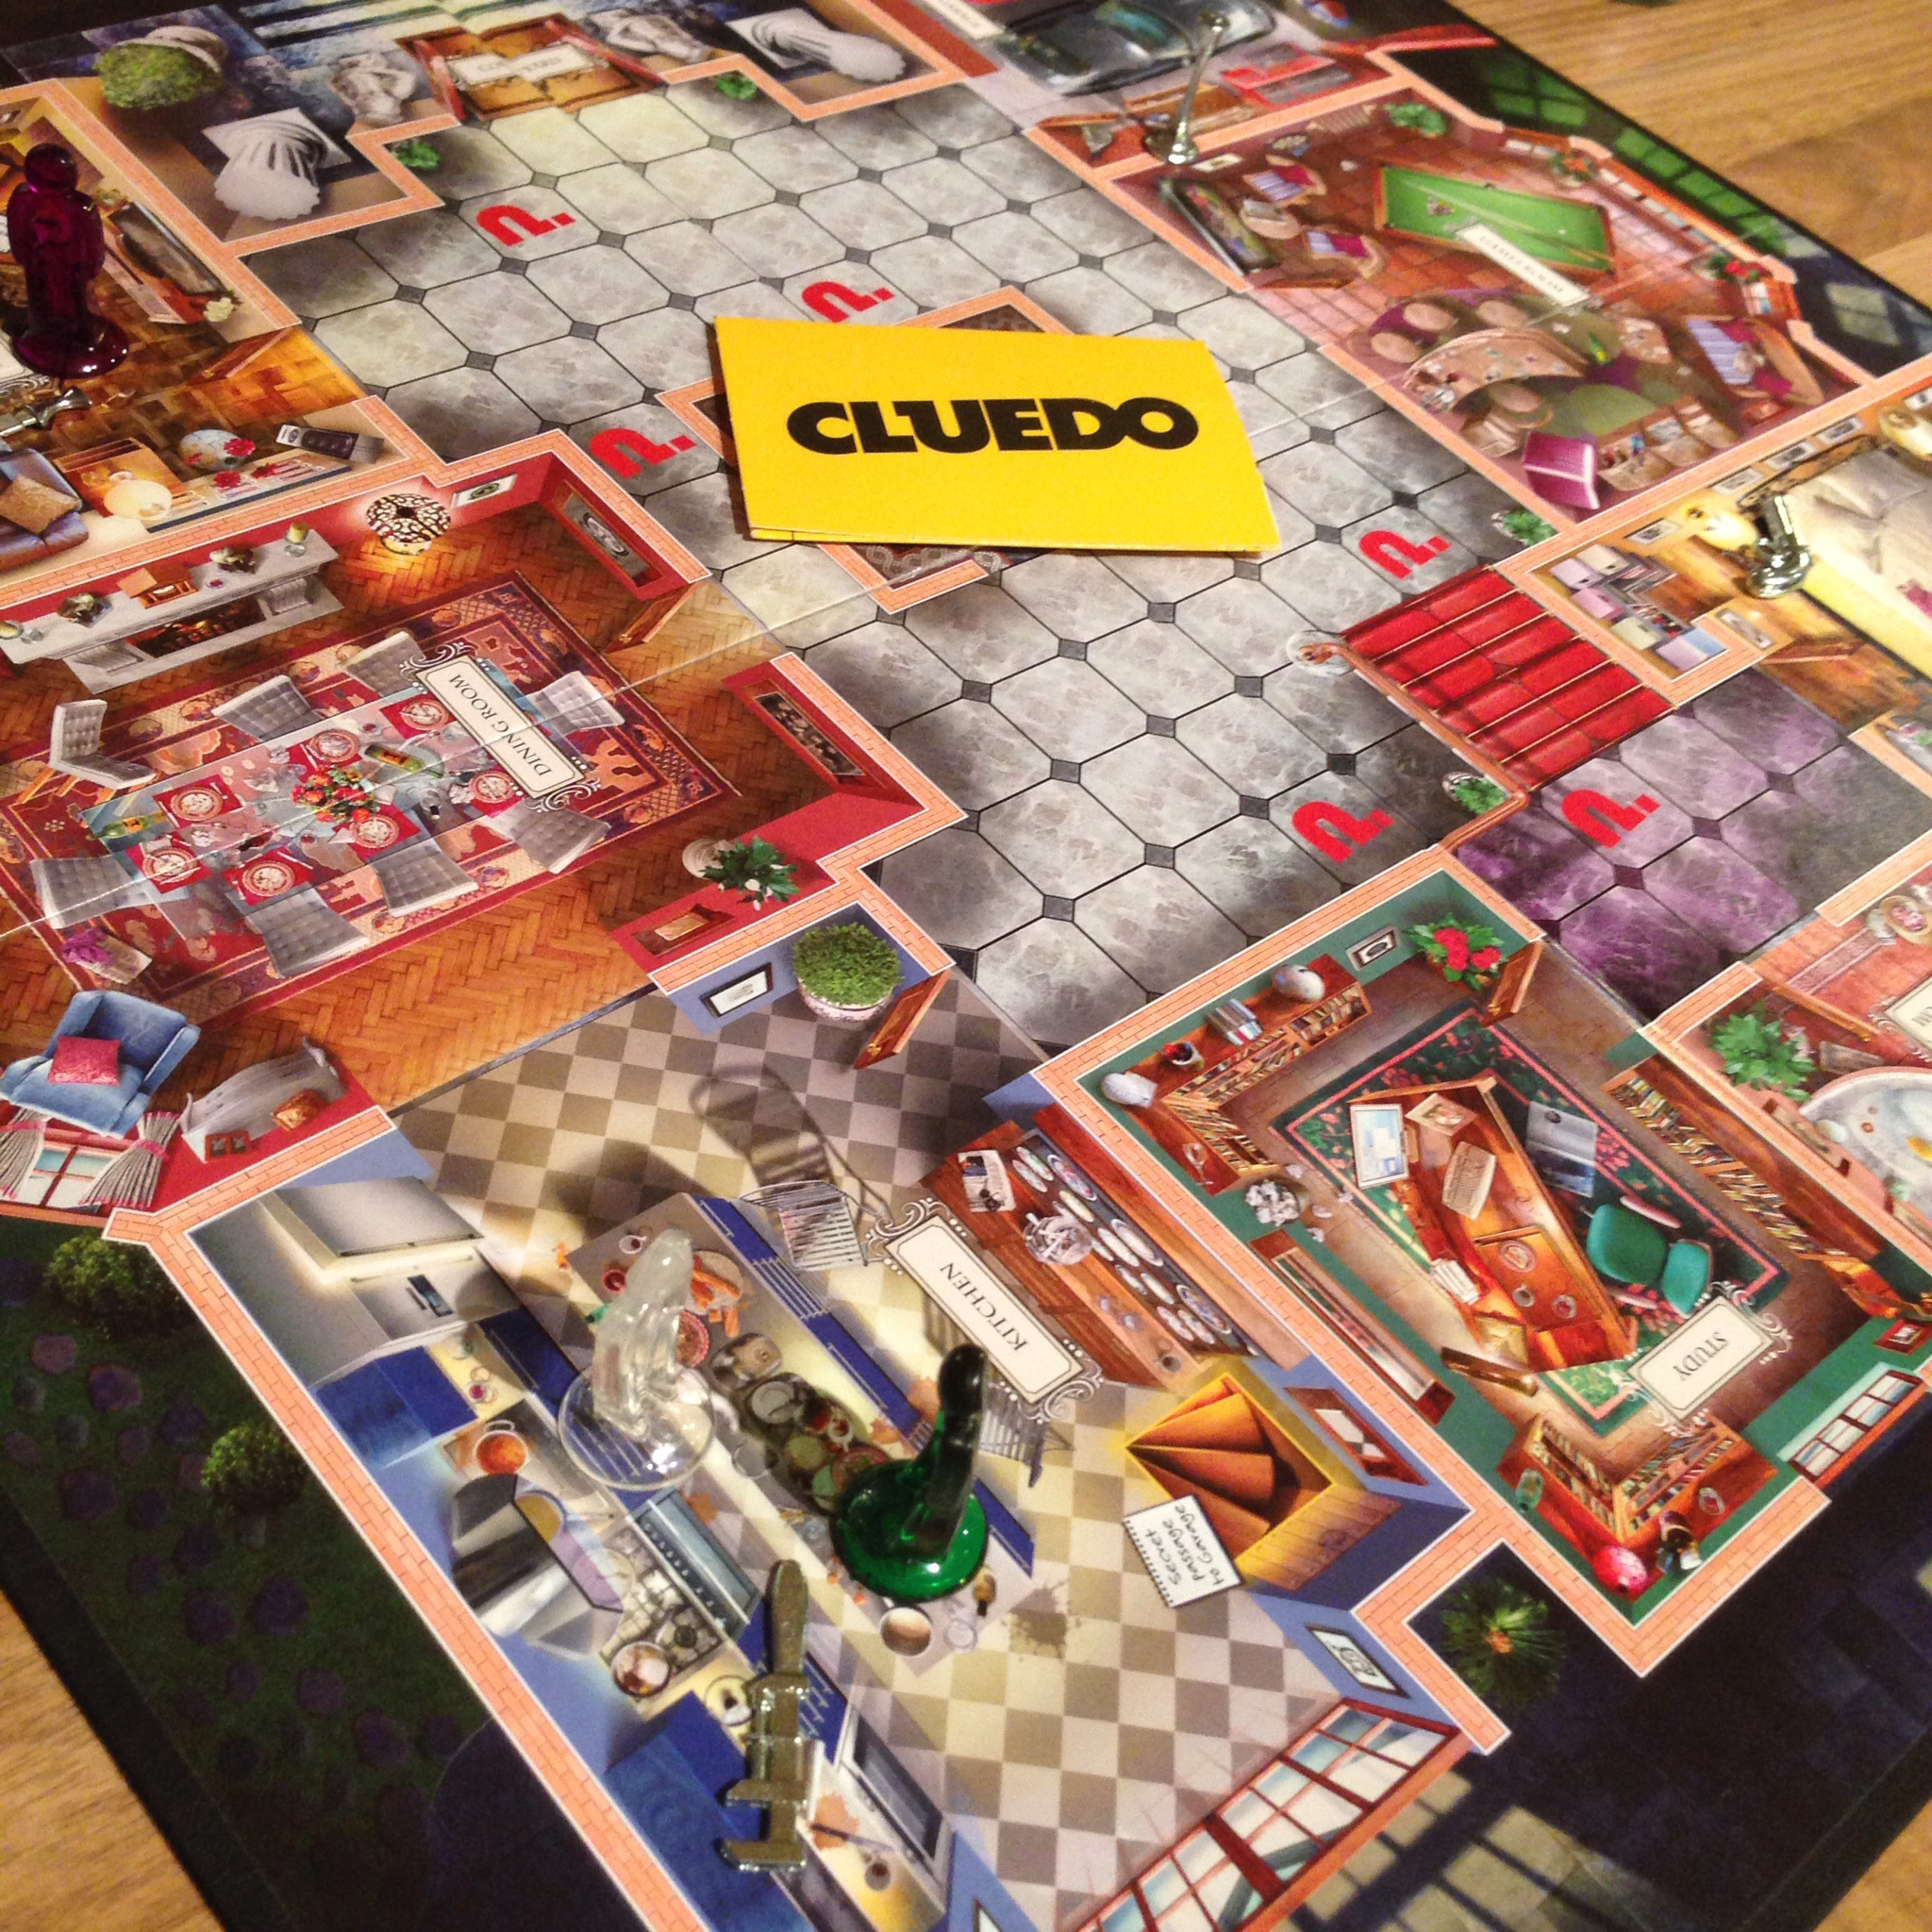 30 December – Cluedo – our Christmas board game!